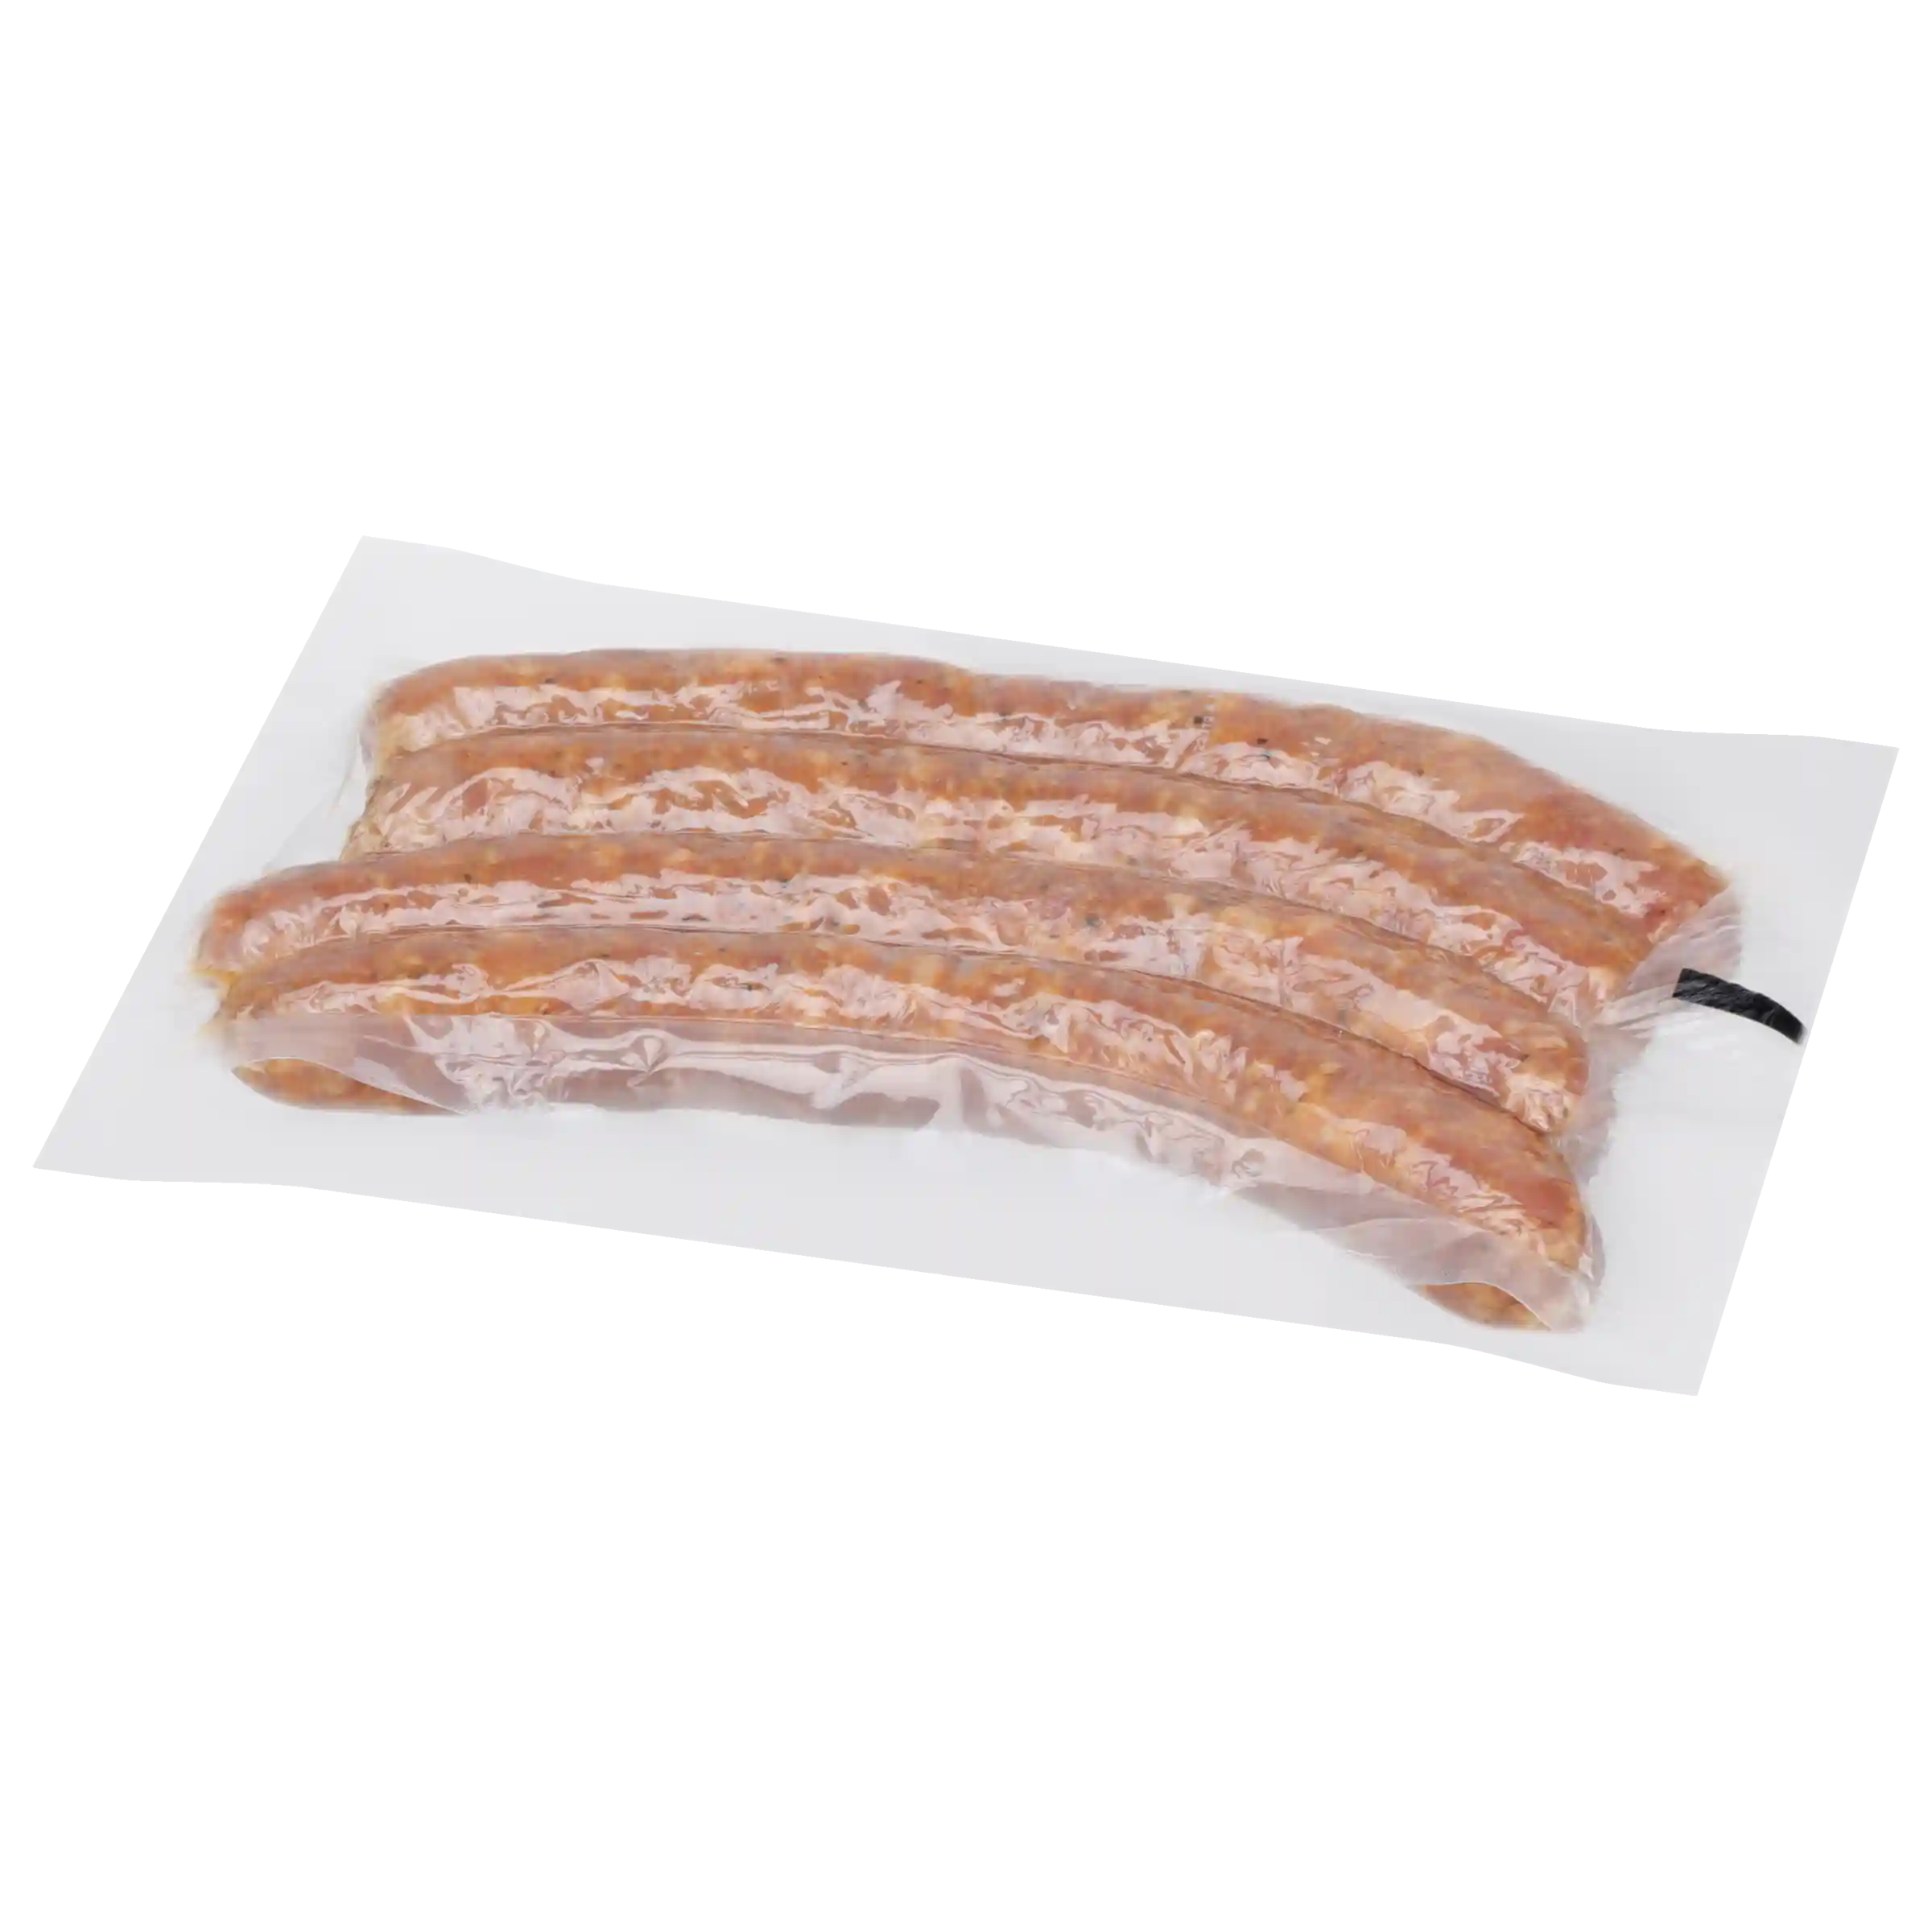 Aidells® Fully Cooked Smoked Cajun-Style Andouille Pork Sausage, 2 oz, 128 Links per Case, 16 Lbs, Frozen_image_21